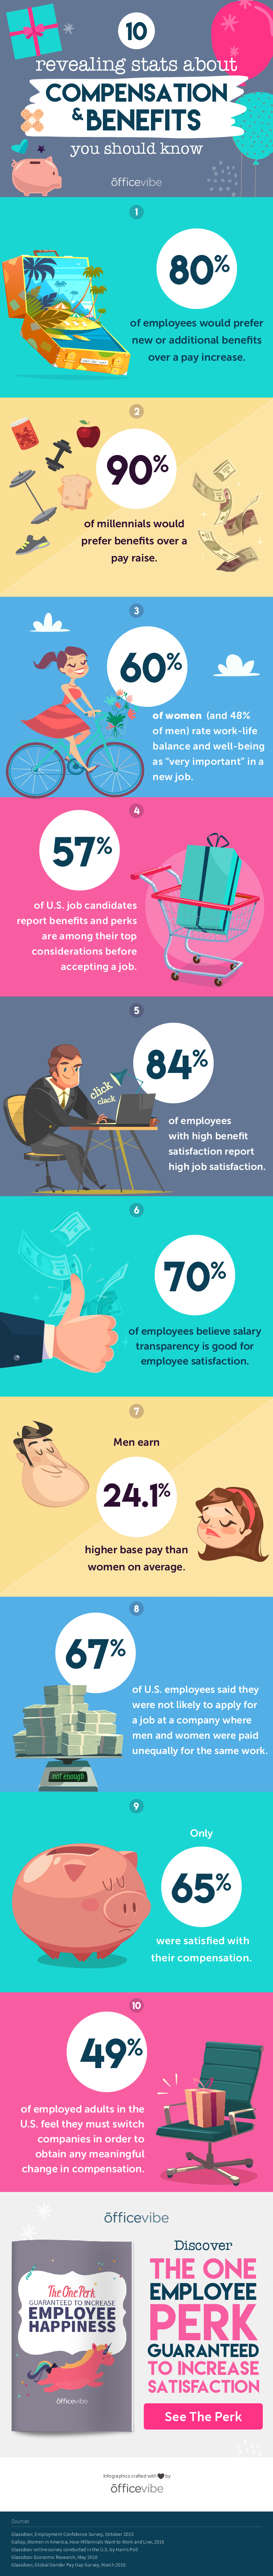 infographic about employee compensation